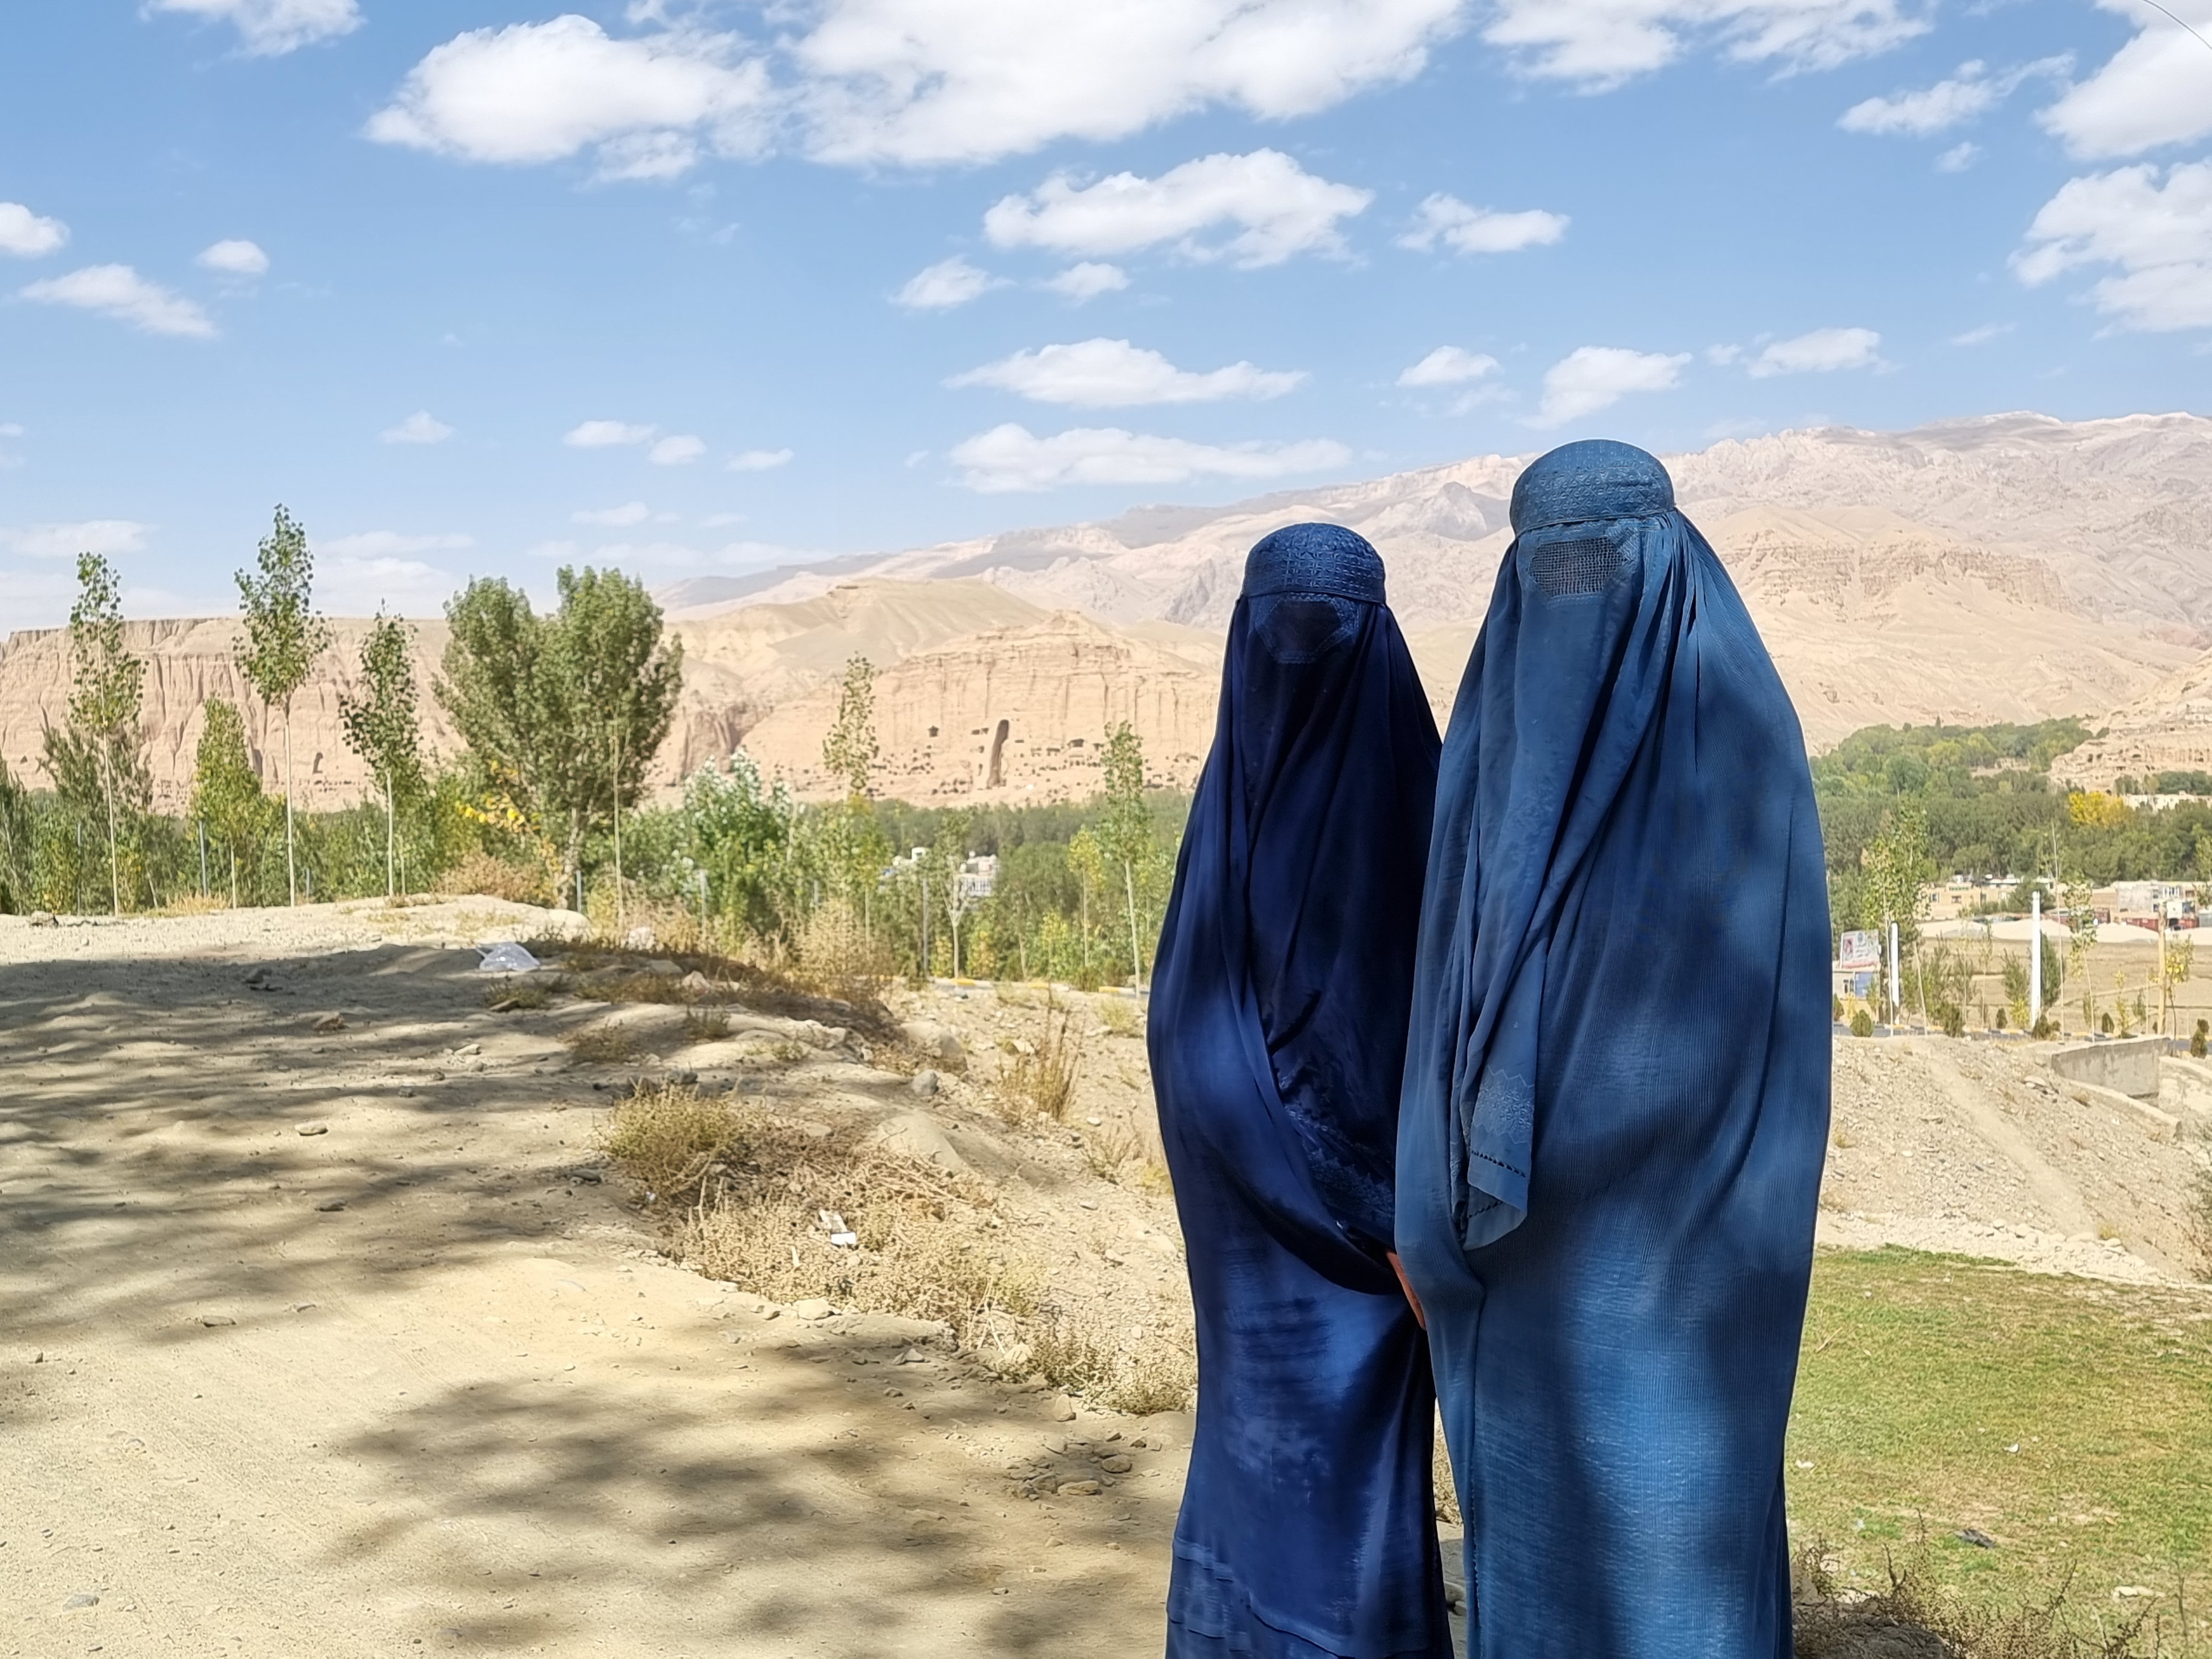 I travelled around Taliban-controlled Afghanistan